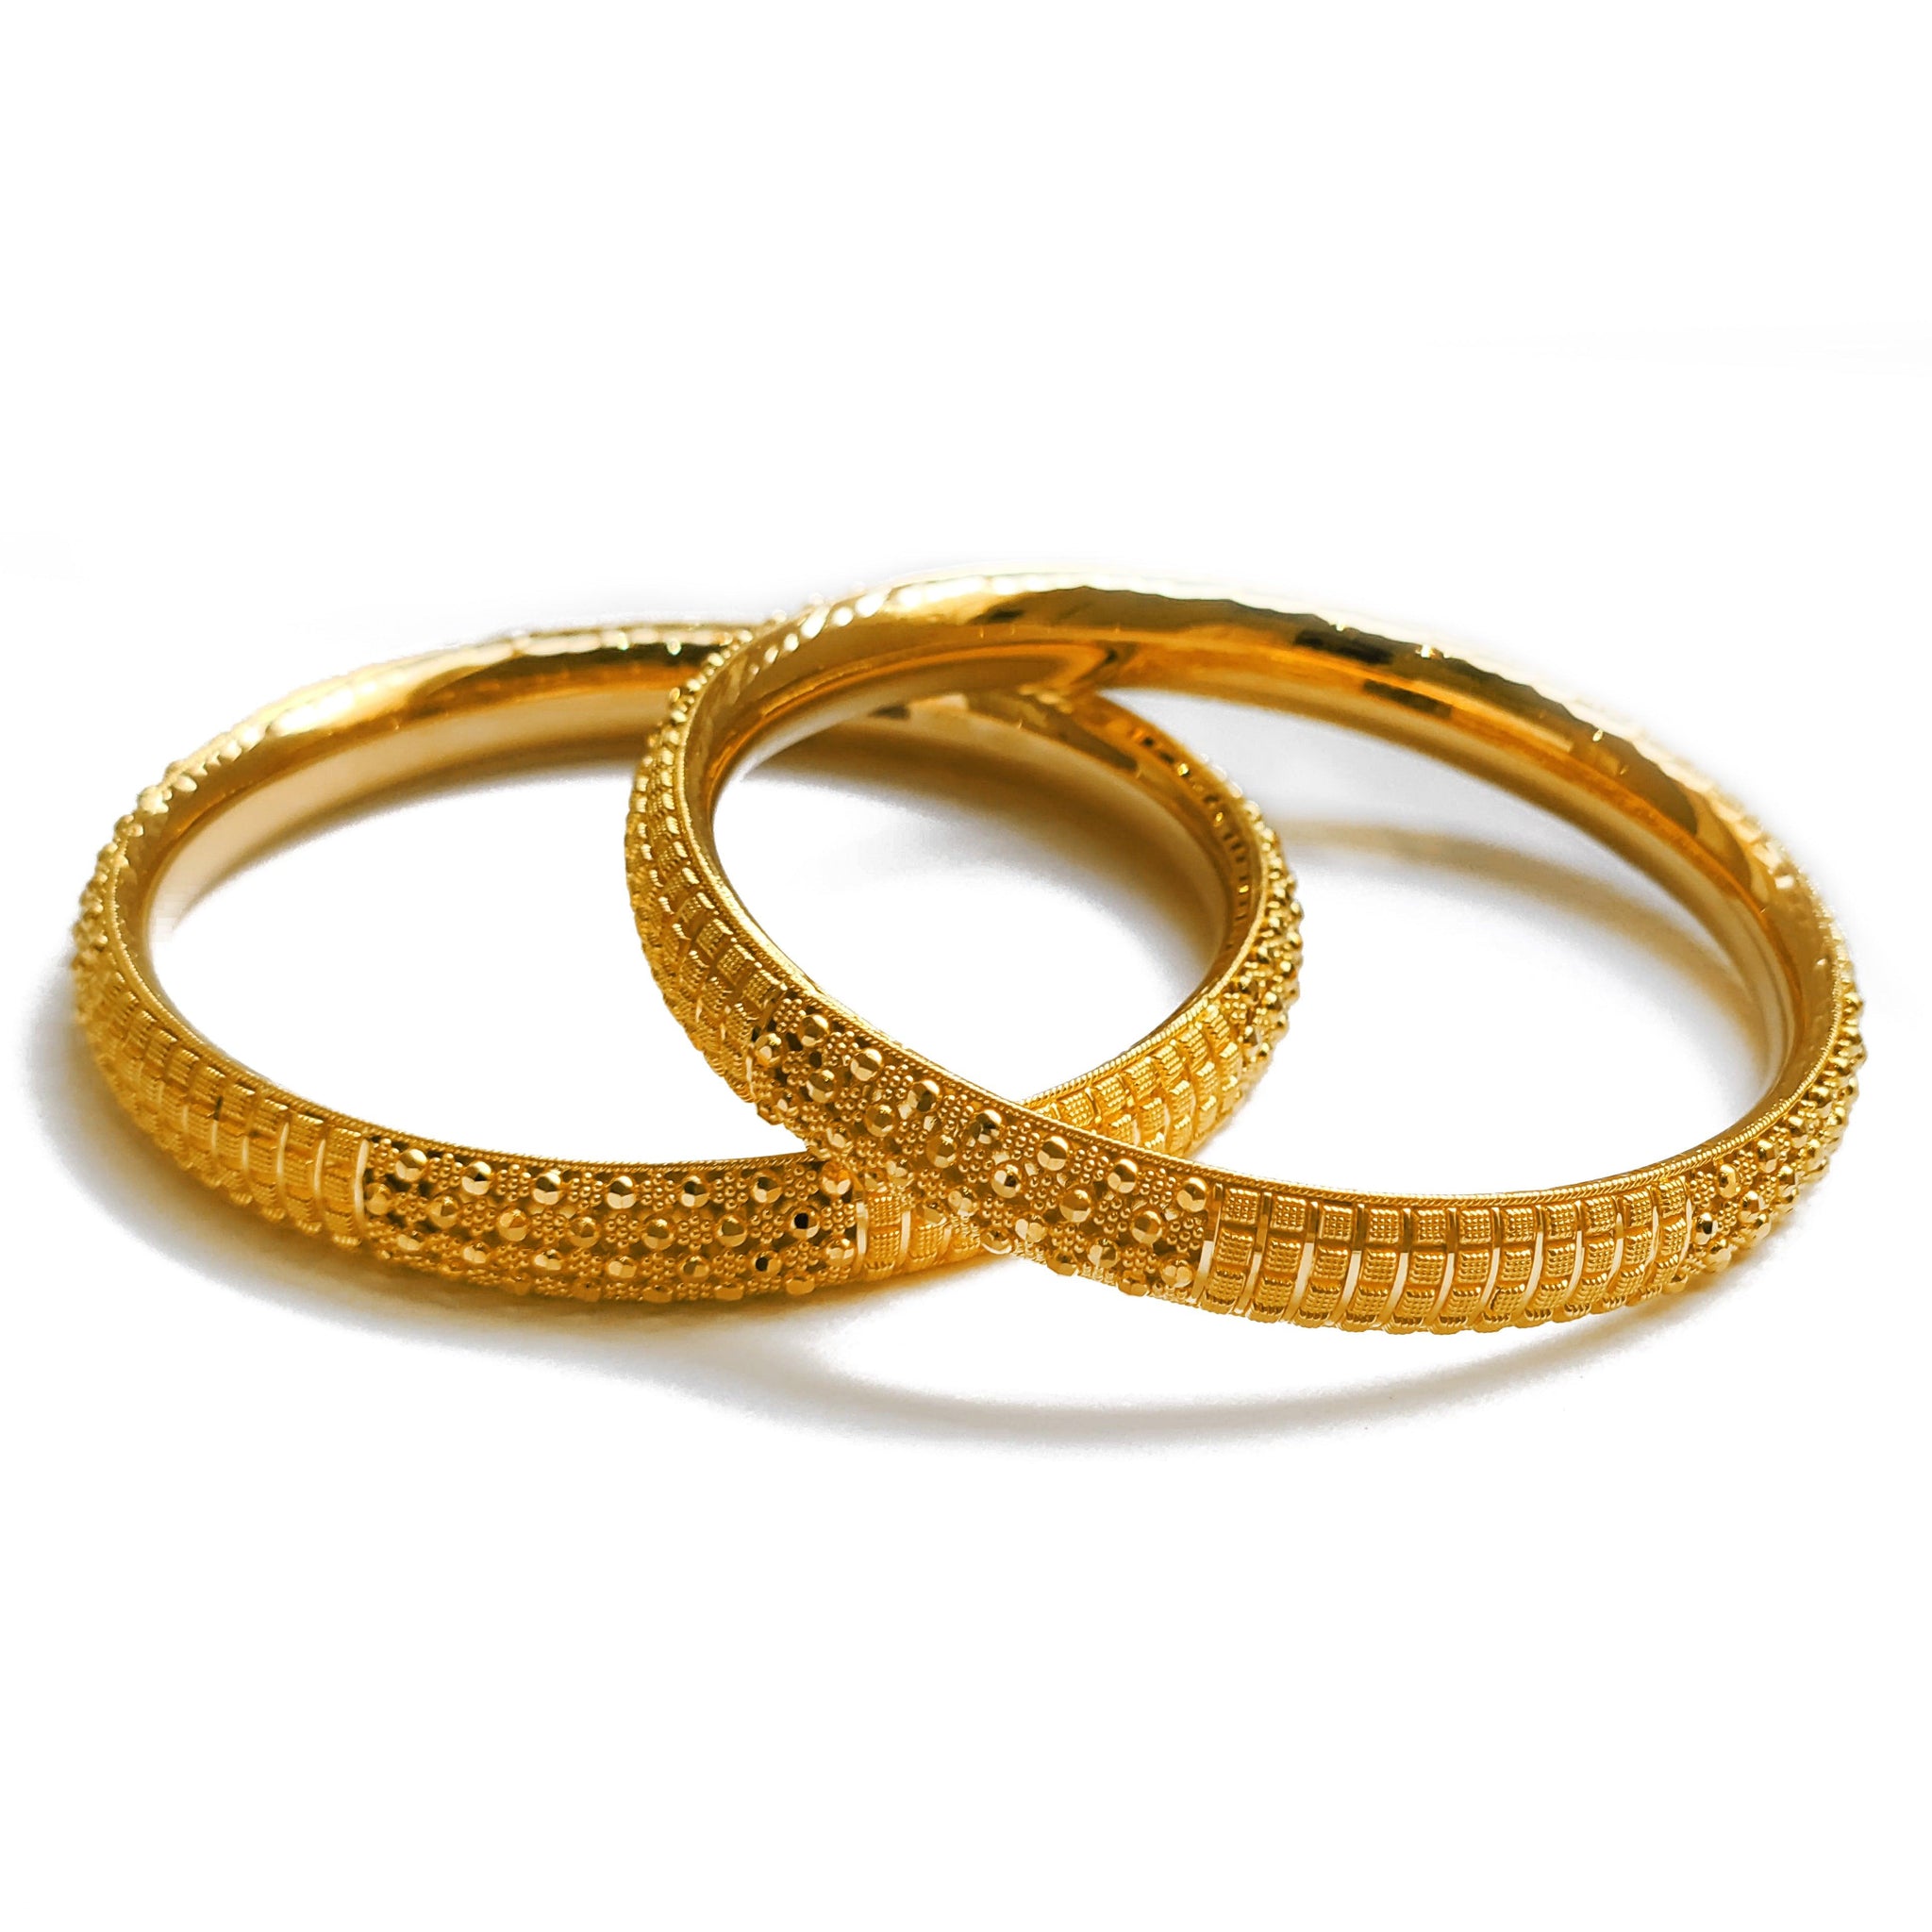 Set of Six 22ct Gold Bangles with Diamond Cut Design and Comfort Fit B-8189